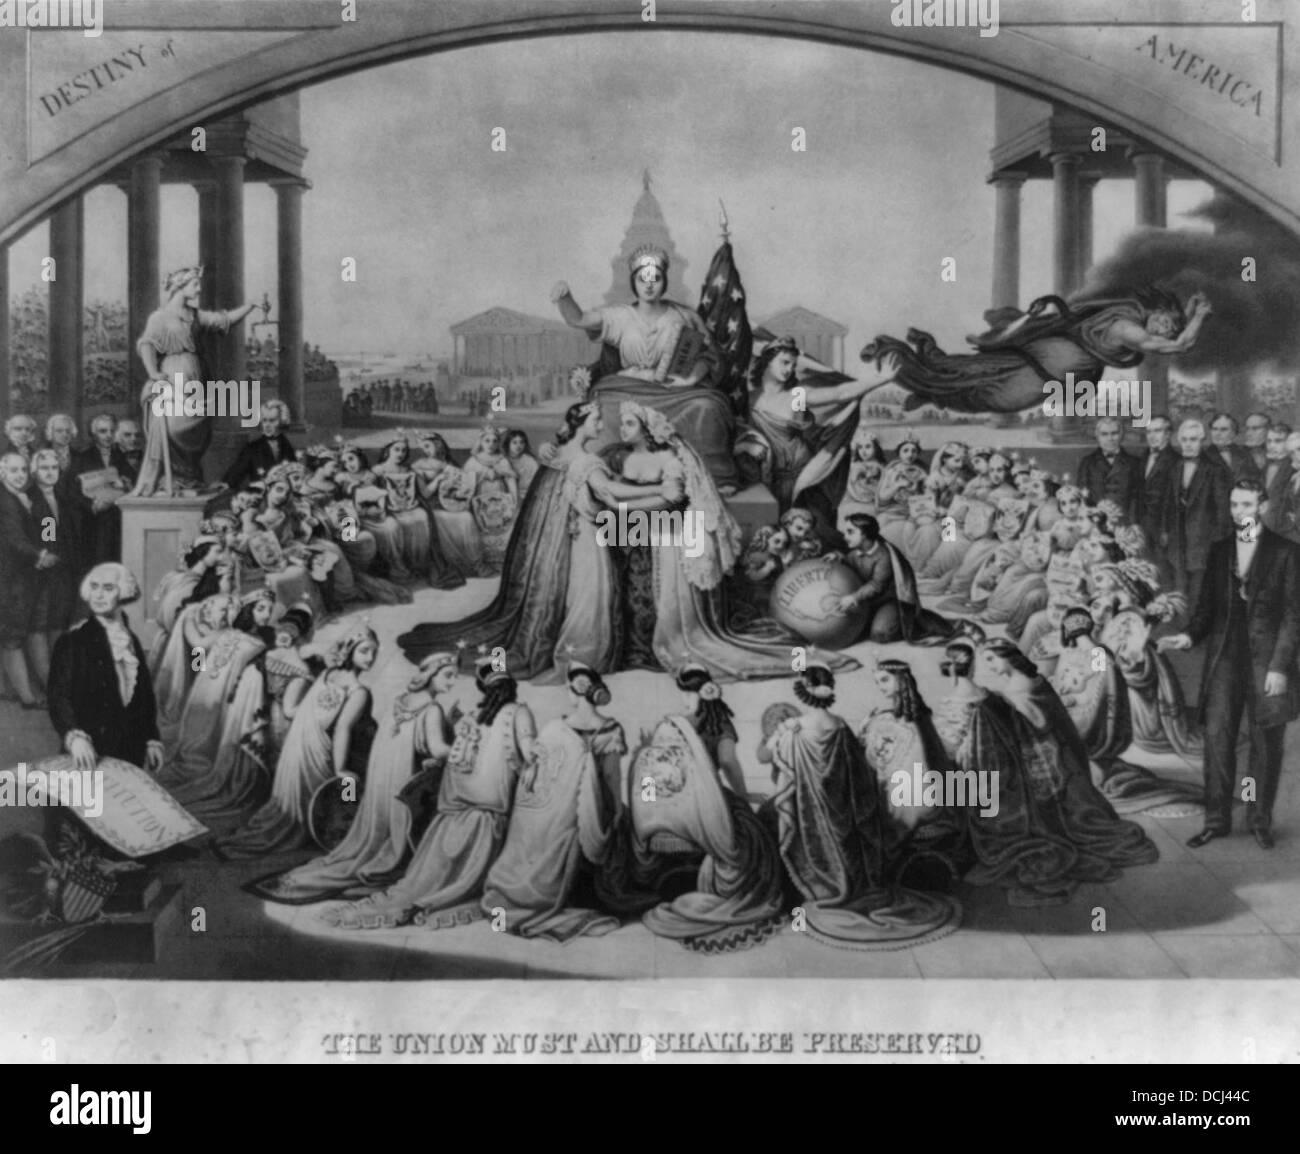 The Union must and shall be preserved, USA Civil War illustration Stock Photo